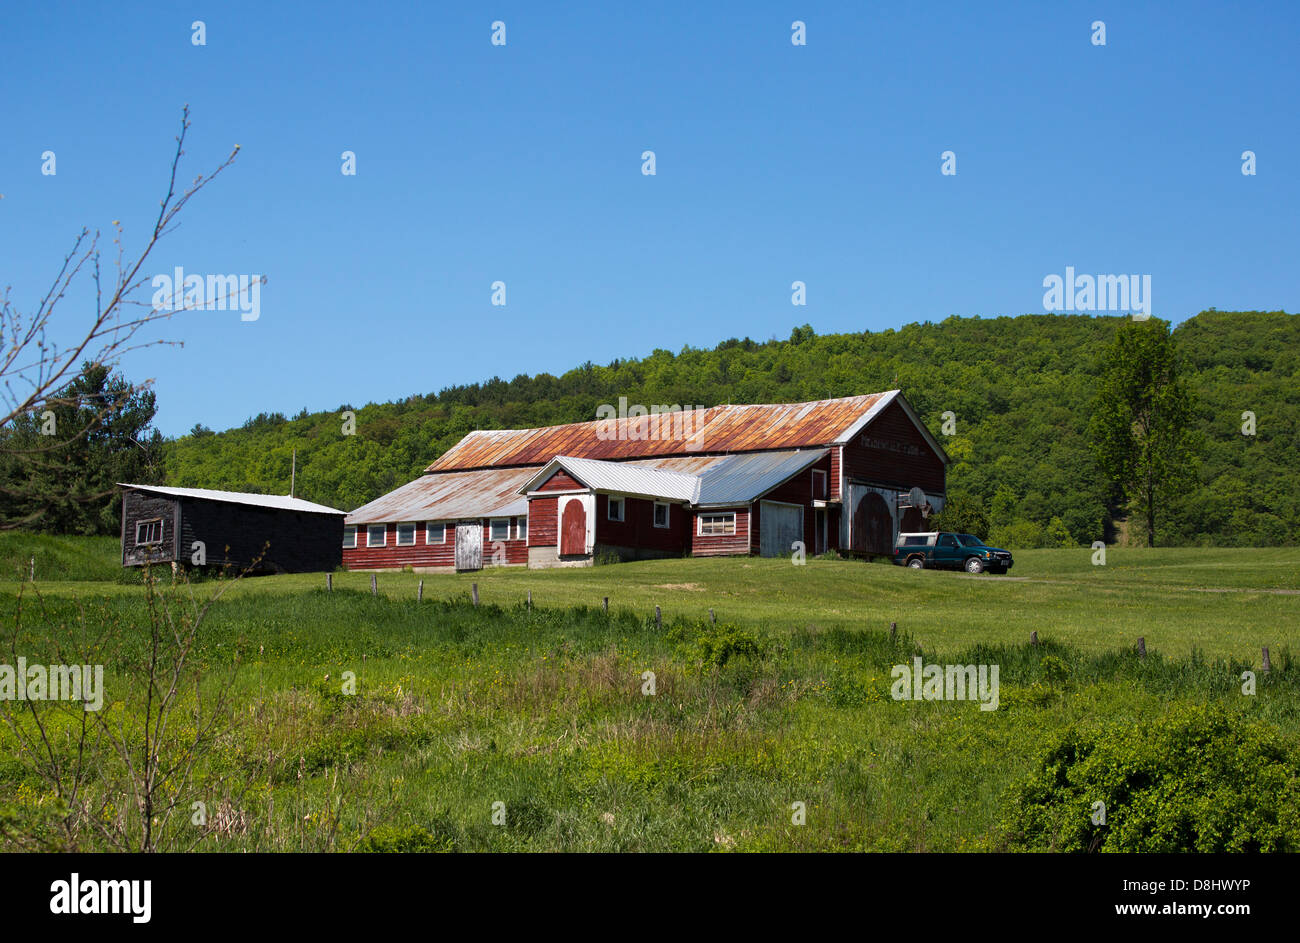 Vintage farm barn with a rusty metal roof. Stock Photo